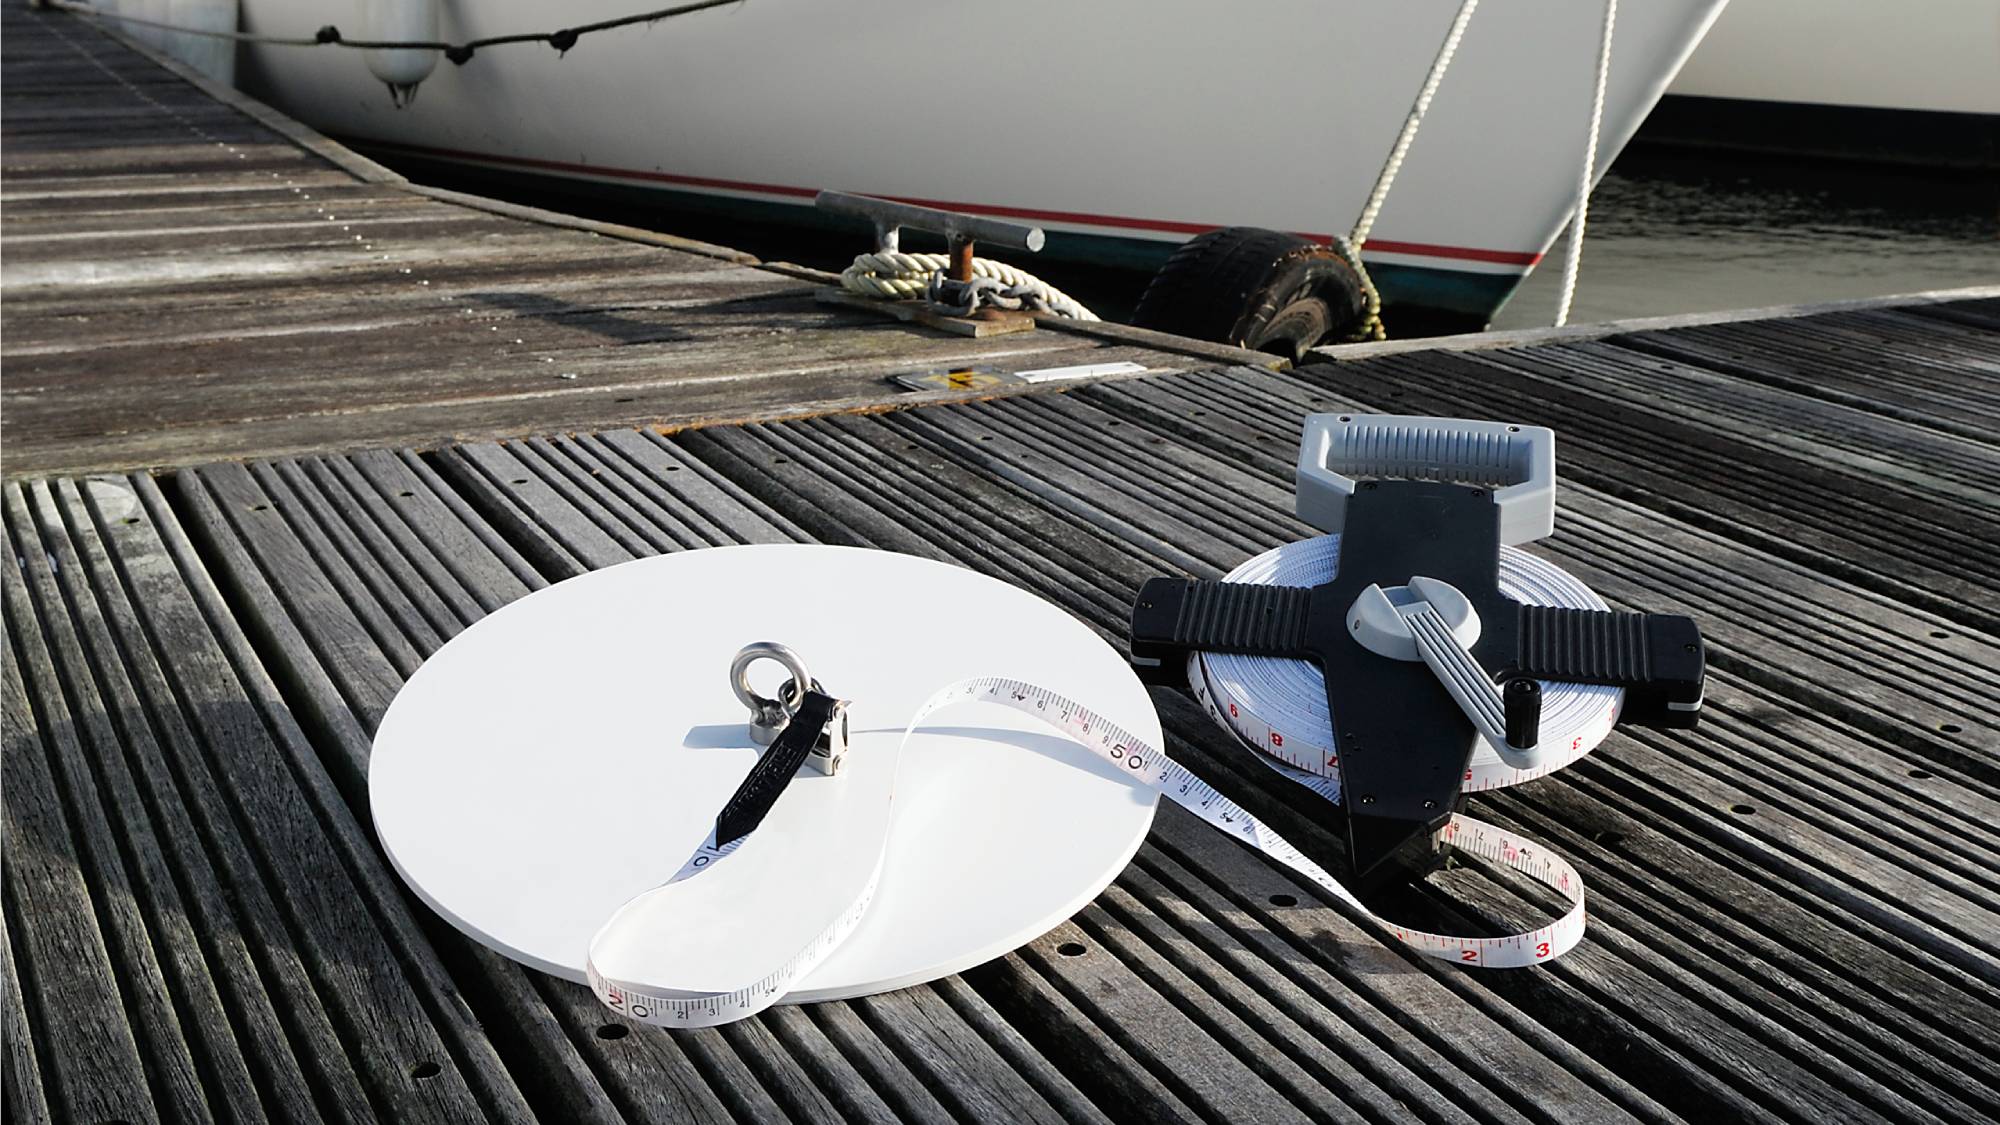 You can help measure the ocean’s health with this homemade gadget